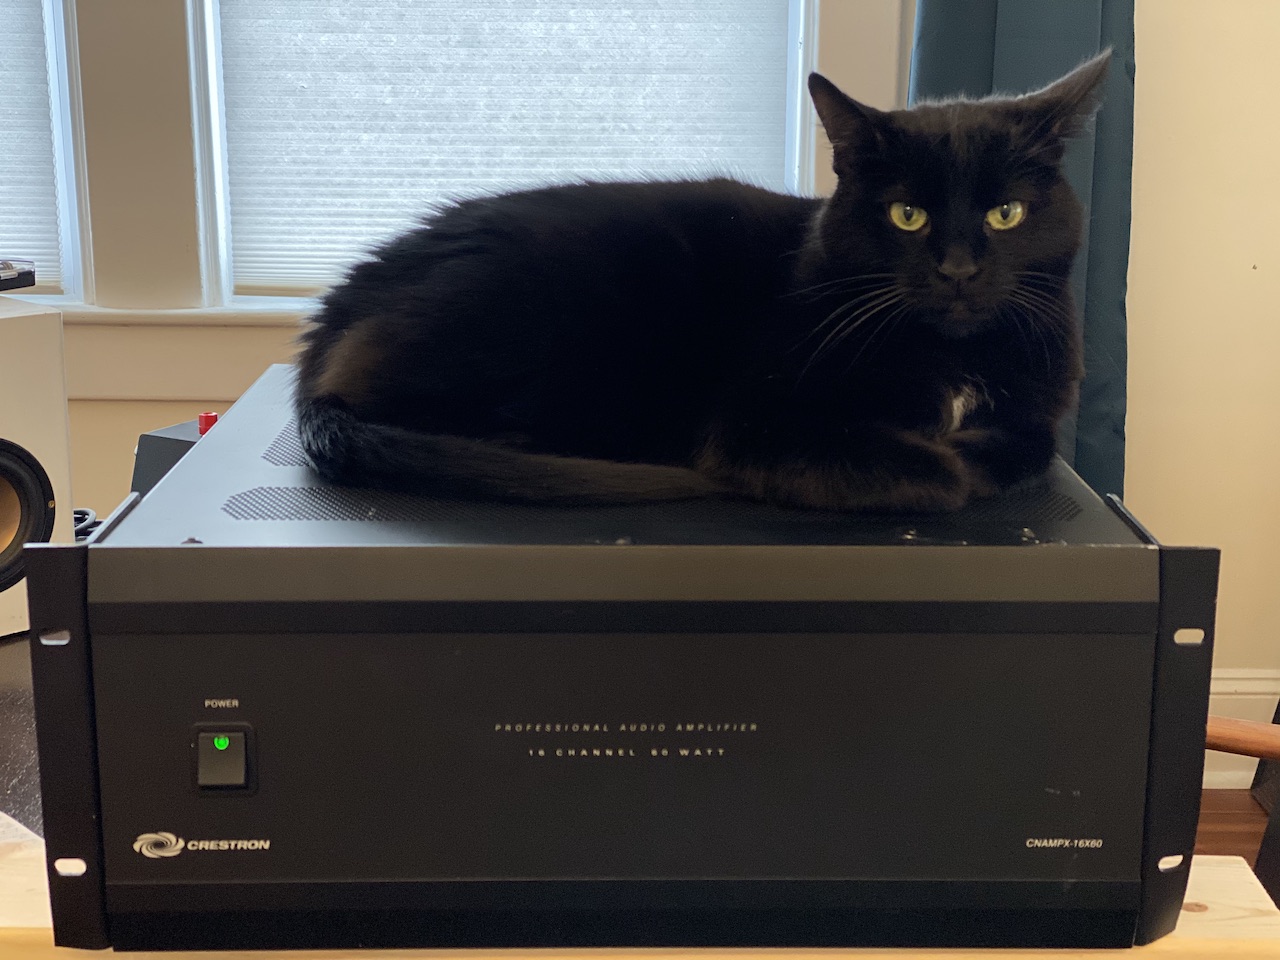 My cat performs the ritual swearing in of new AV gear by sitting on it.